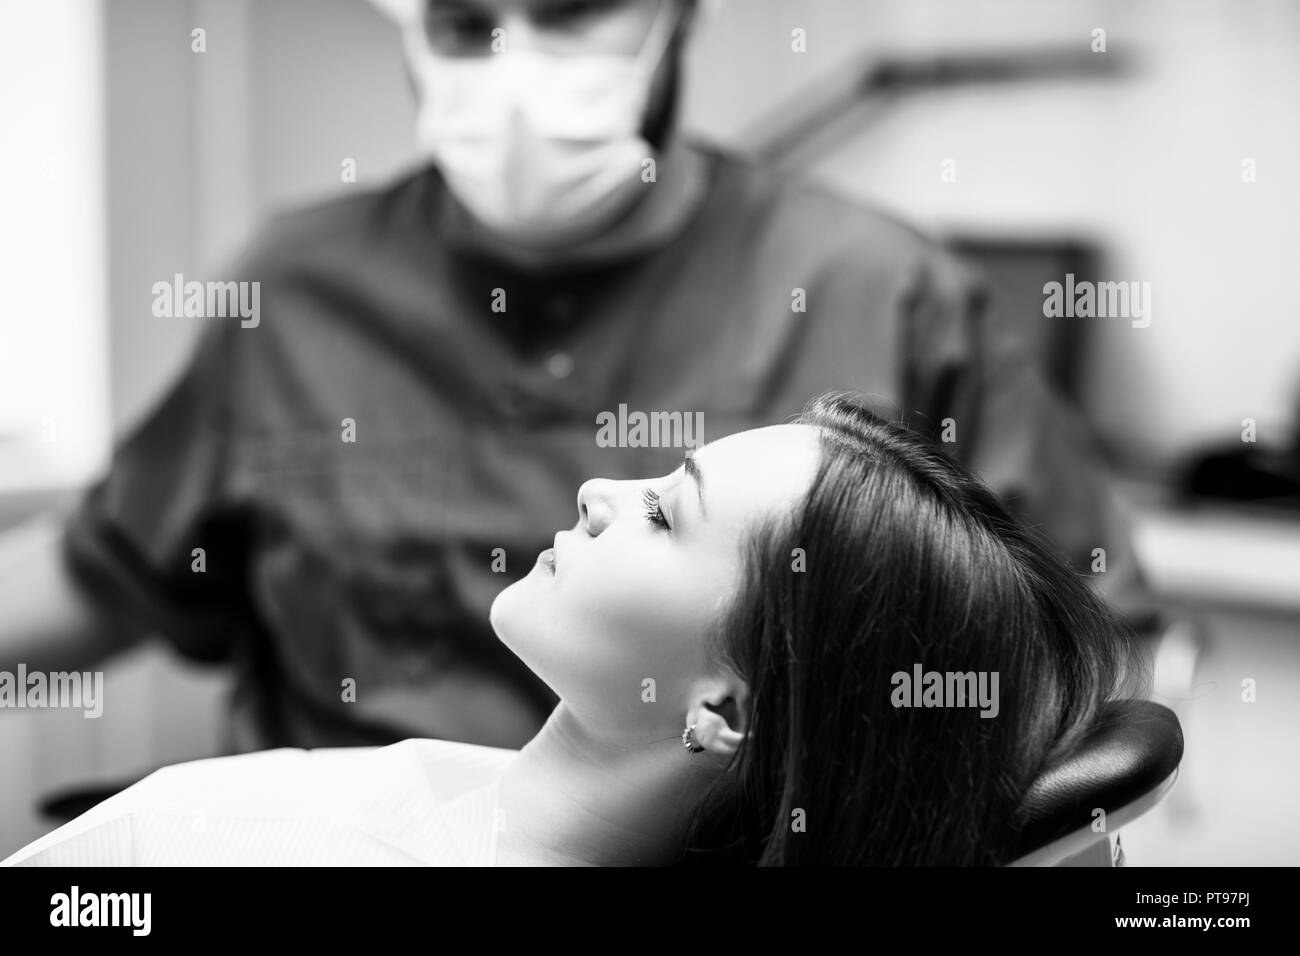 Young woman patient waiting treatment in stomatology clinic. Stock Photo